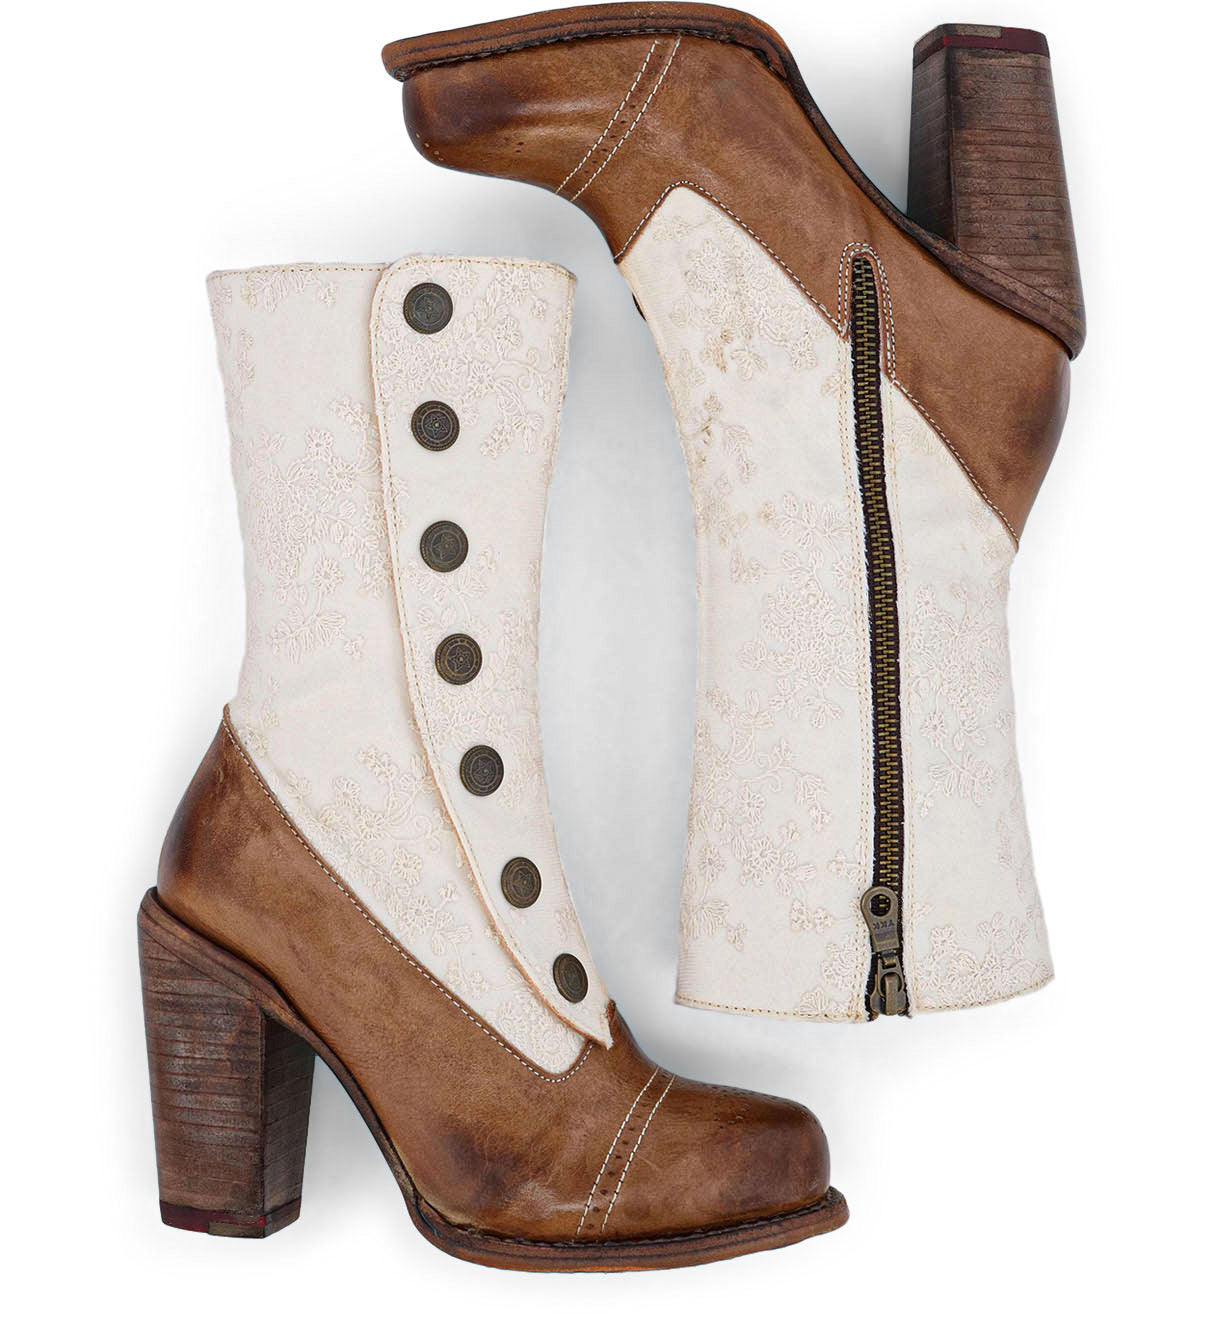 A pair of white and brown Oak Tree Farms Amelia boots with buttons.